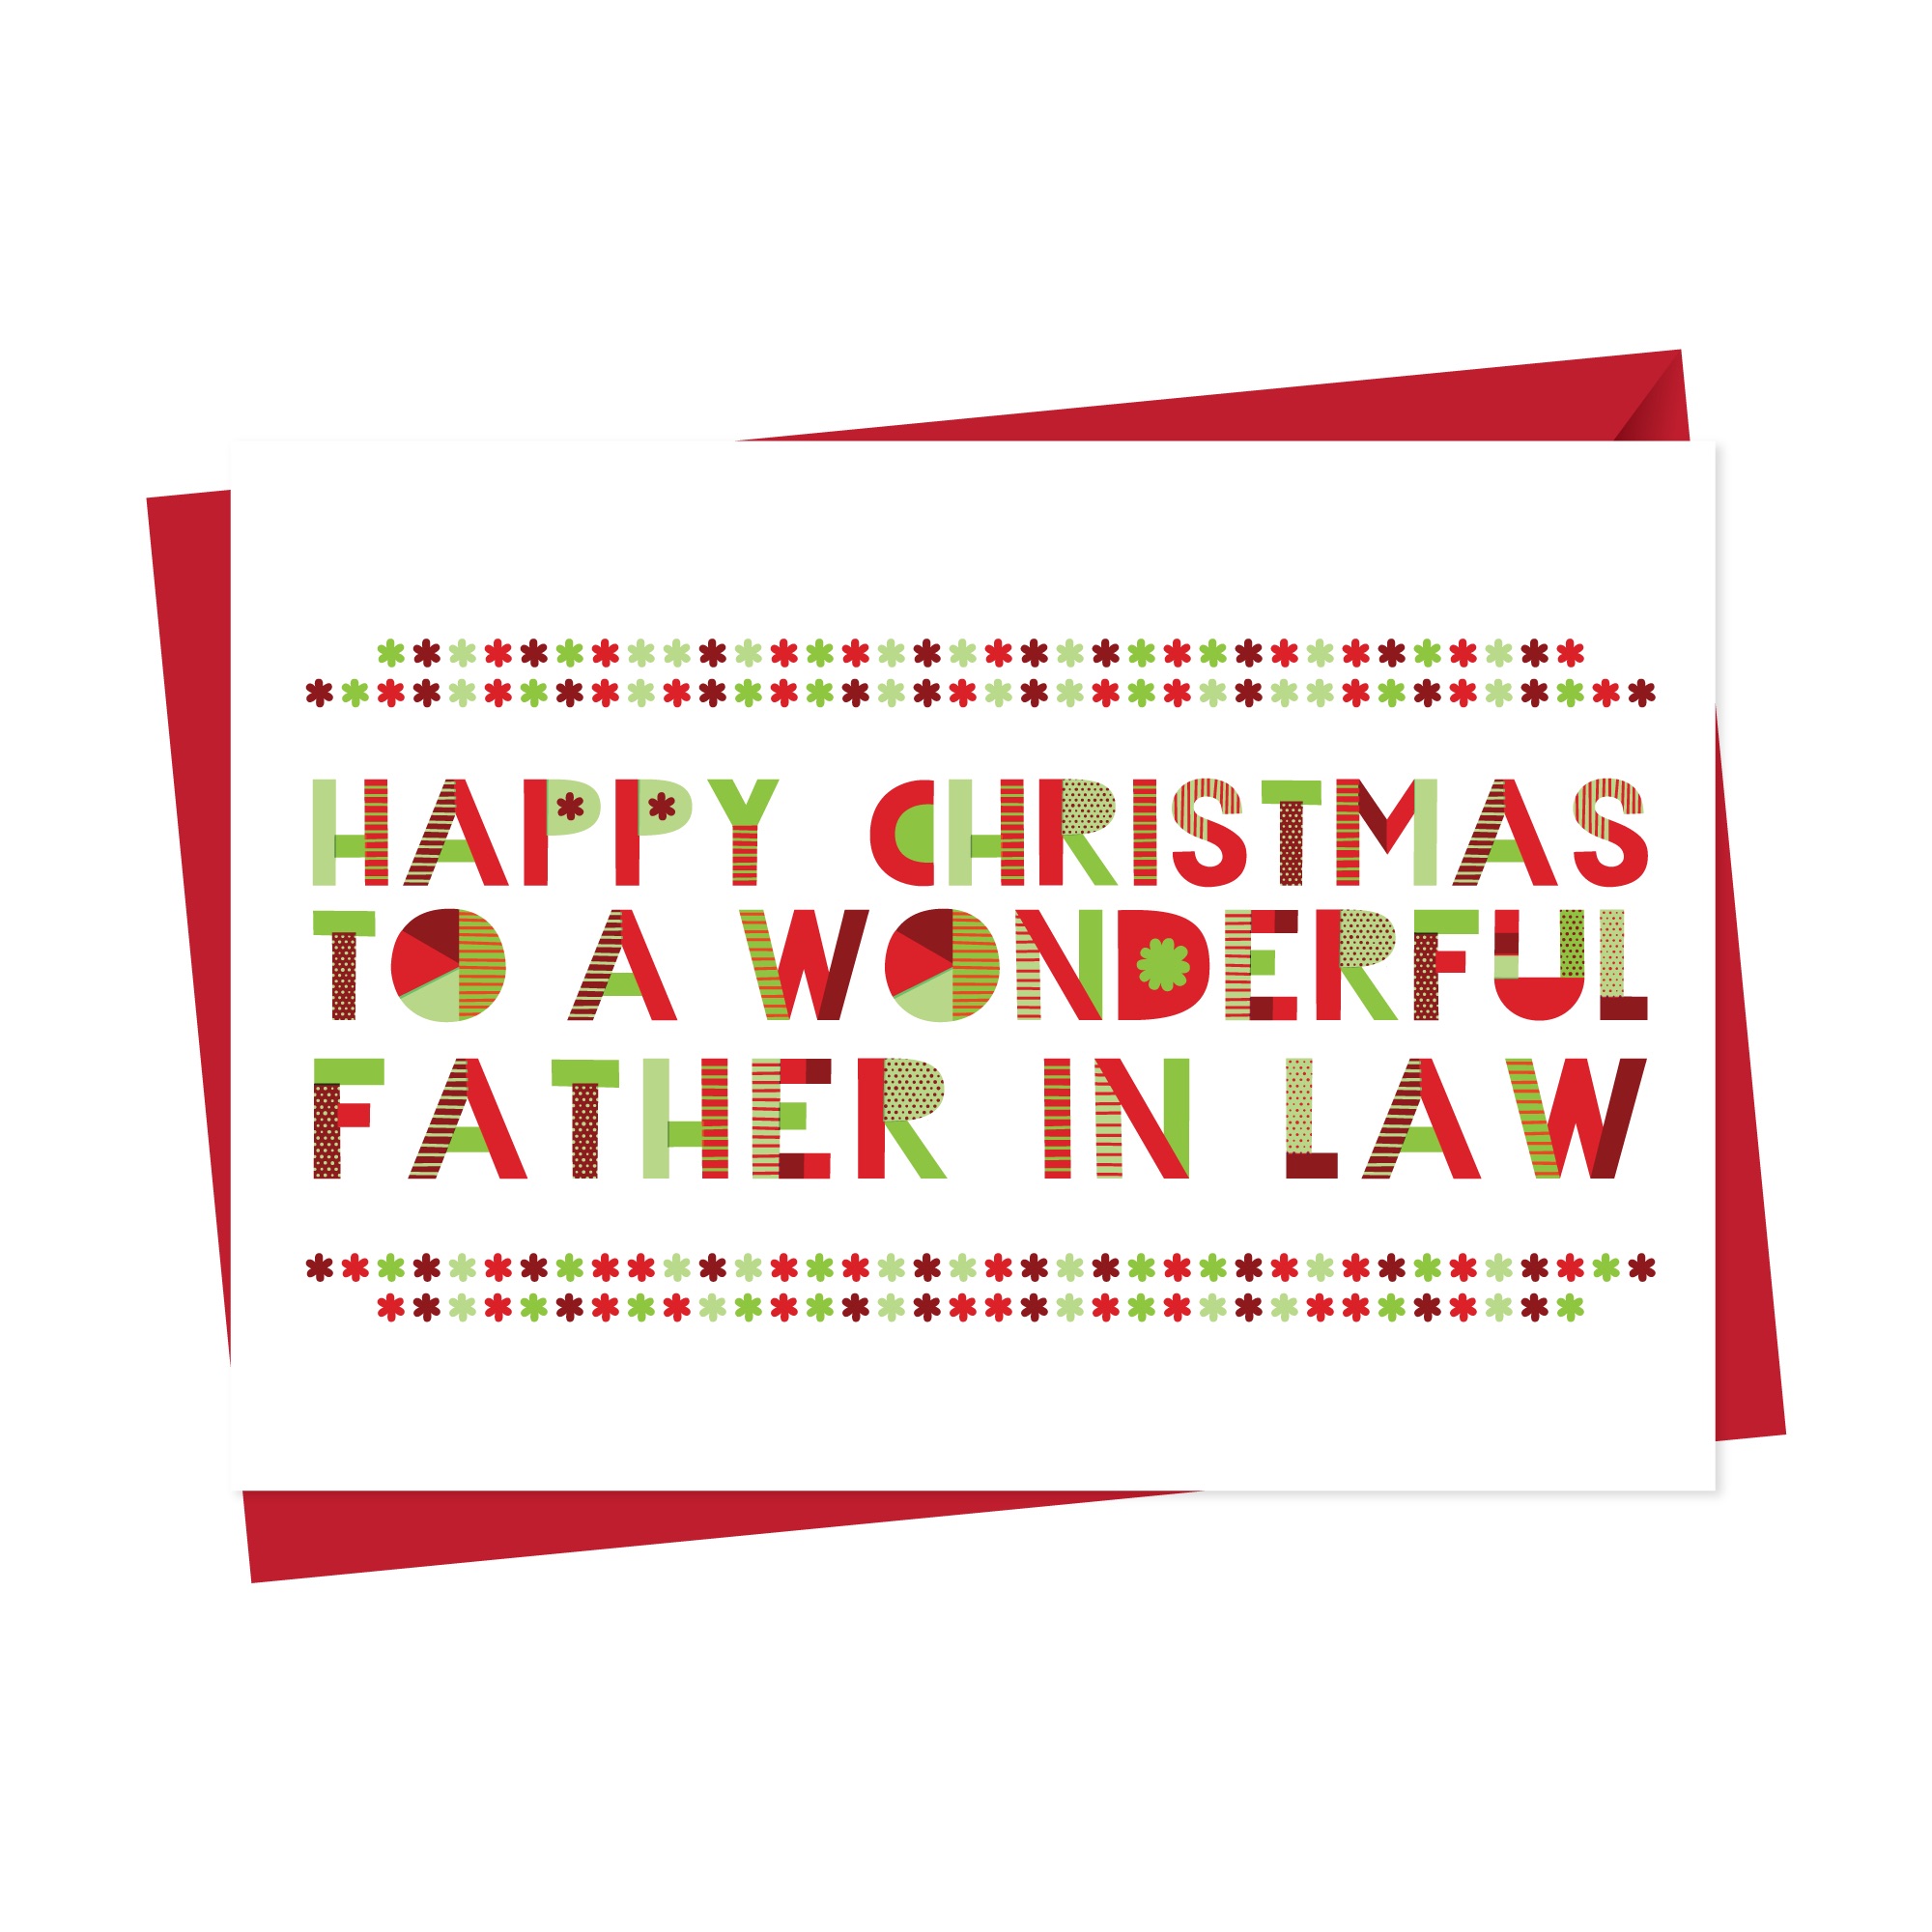 Wonderful Father in Law Christmas Card